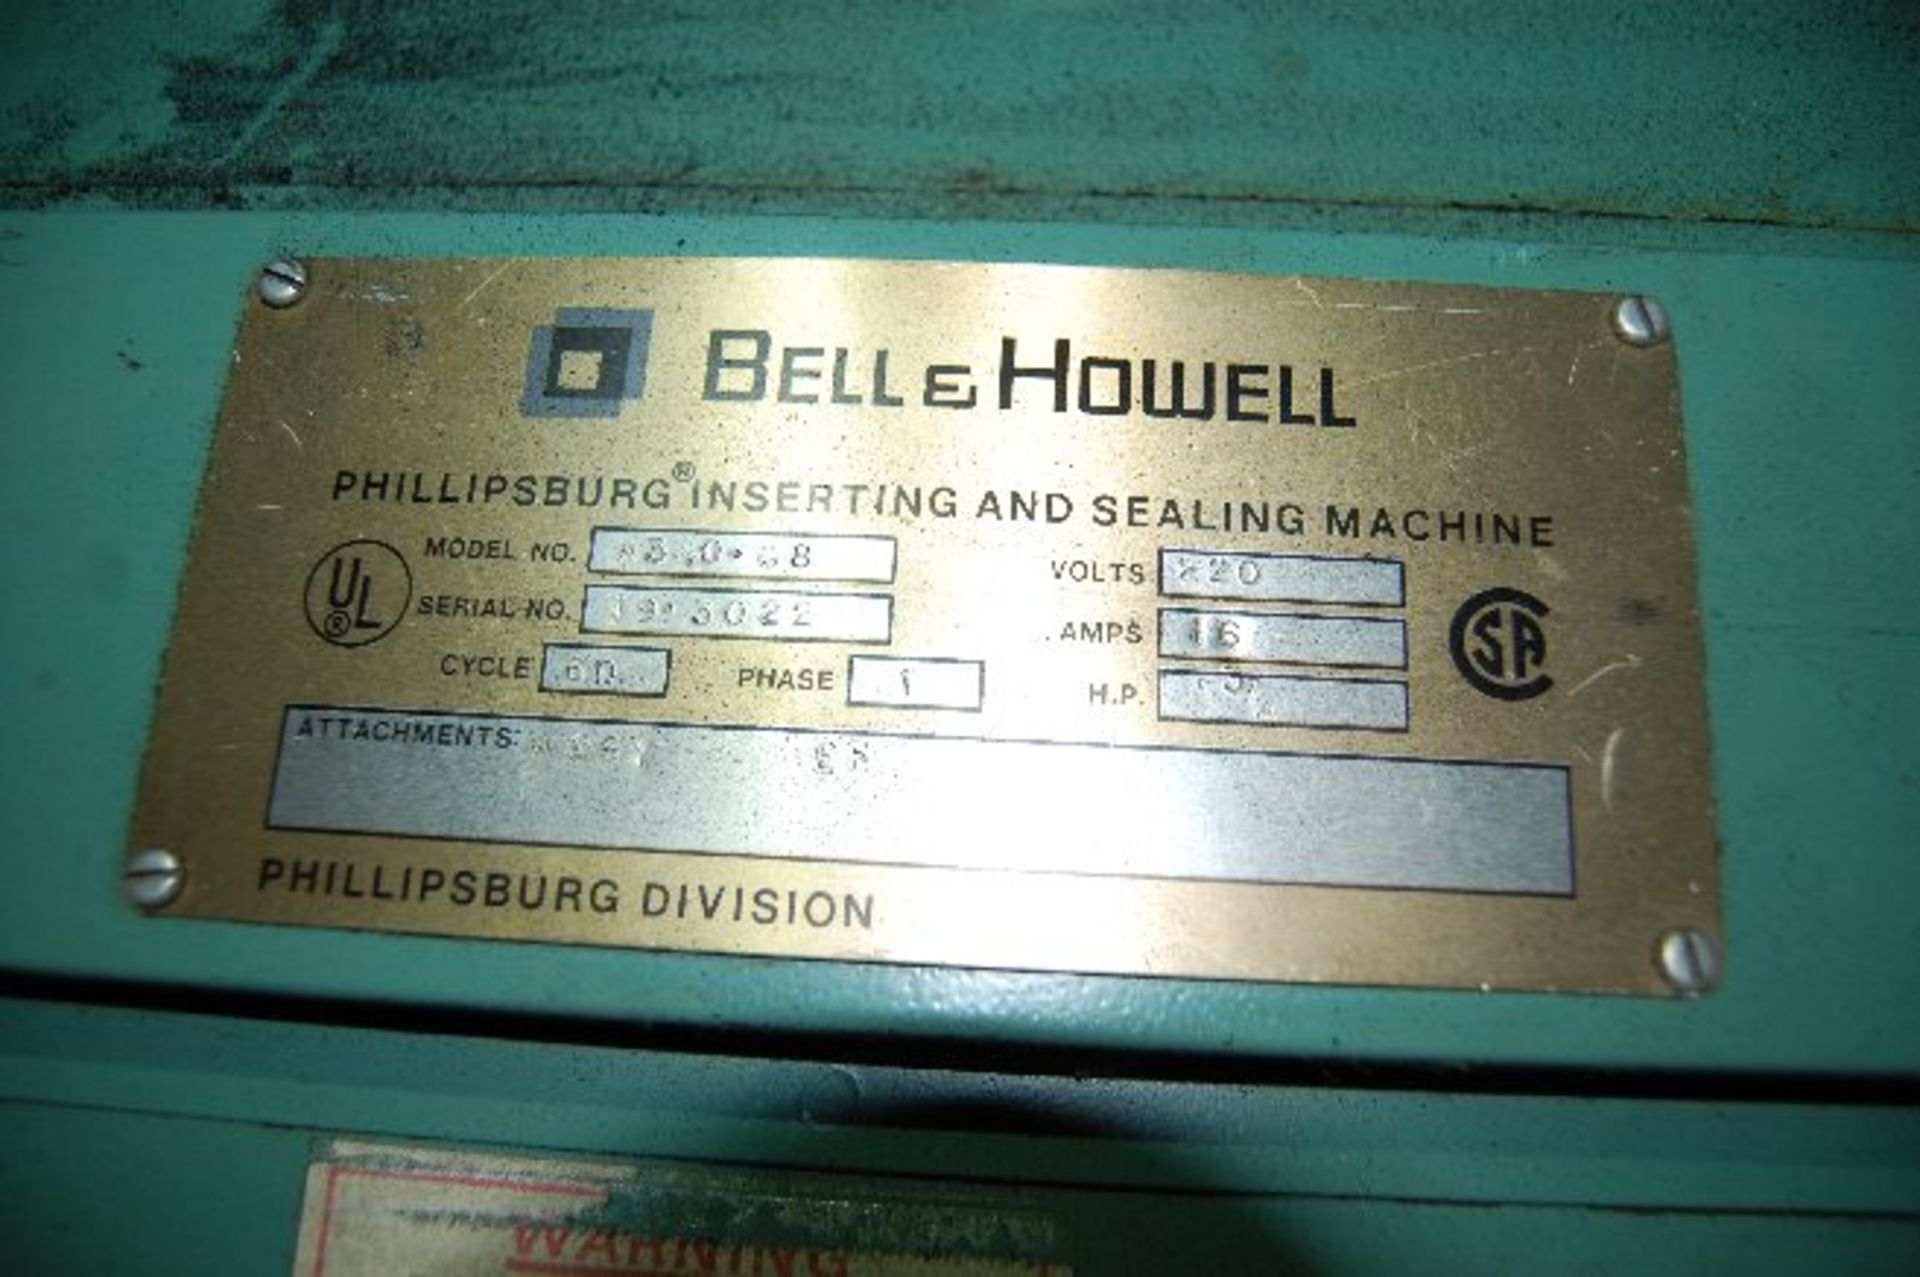 BELL & HOWELL PHILLIPSBURG COMPANY INSERTING & SEALING MACHINE Mdl A340-C8, S/N 193022 - Image 2 of 4